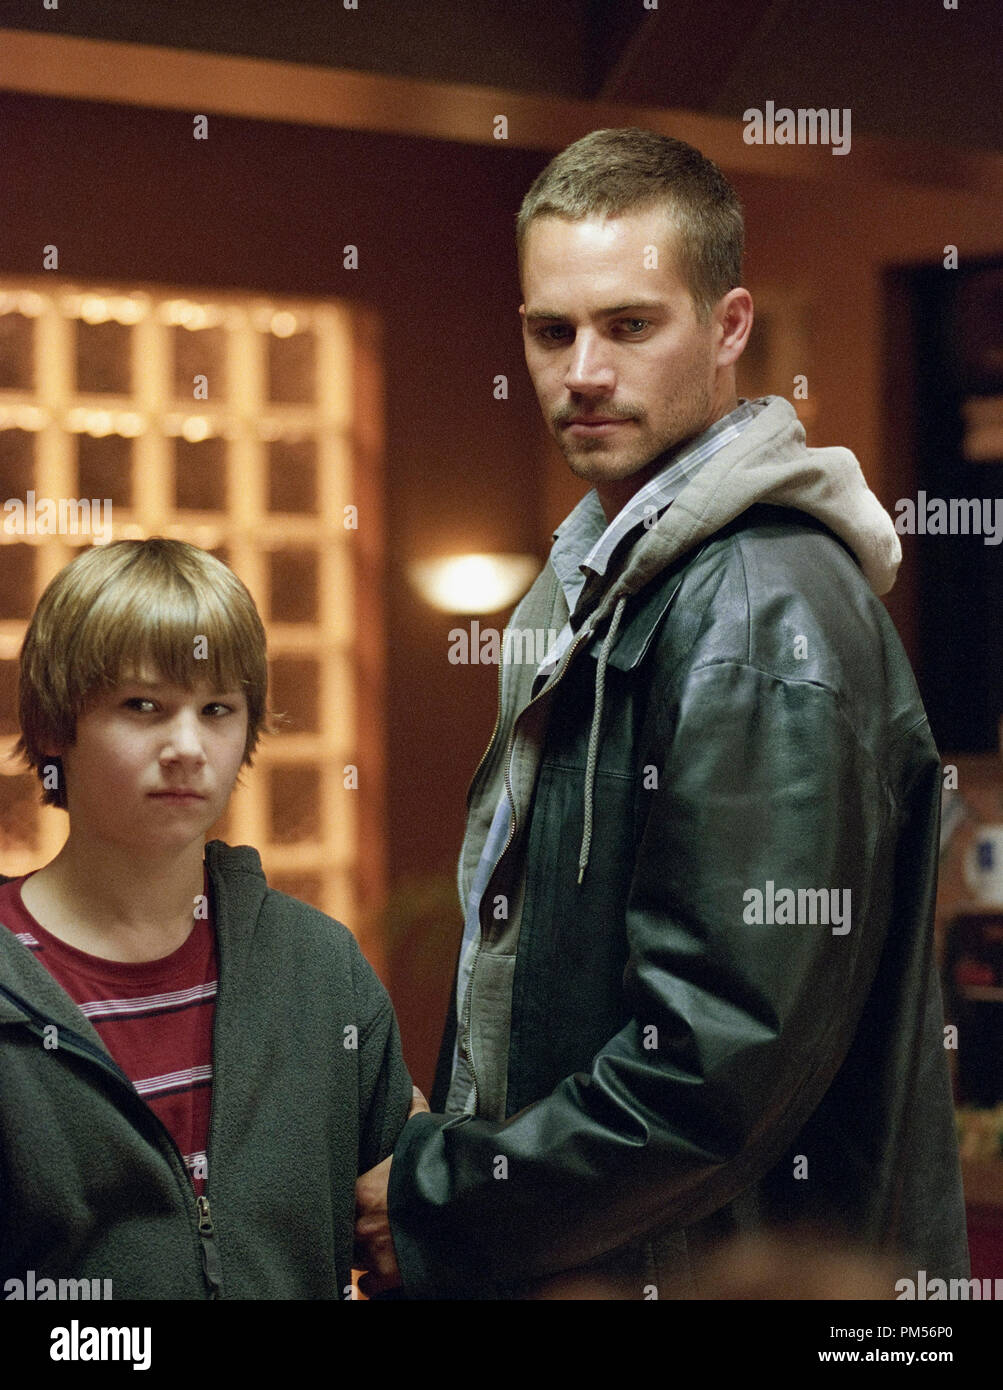 Film Still from 'Running Scared' Alex Neuberger, Paul Walker © 2006 New Line Cinema Photo Credit: Larry D. Horricks  File Reference # 307351292THA  For Editorial Use Only -  All Rights Reserved Stock Photo